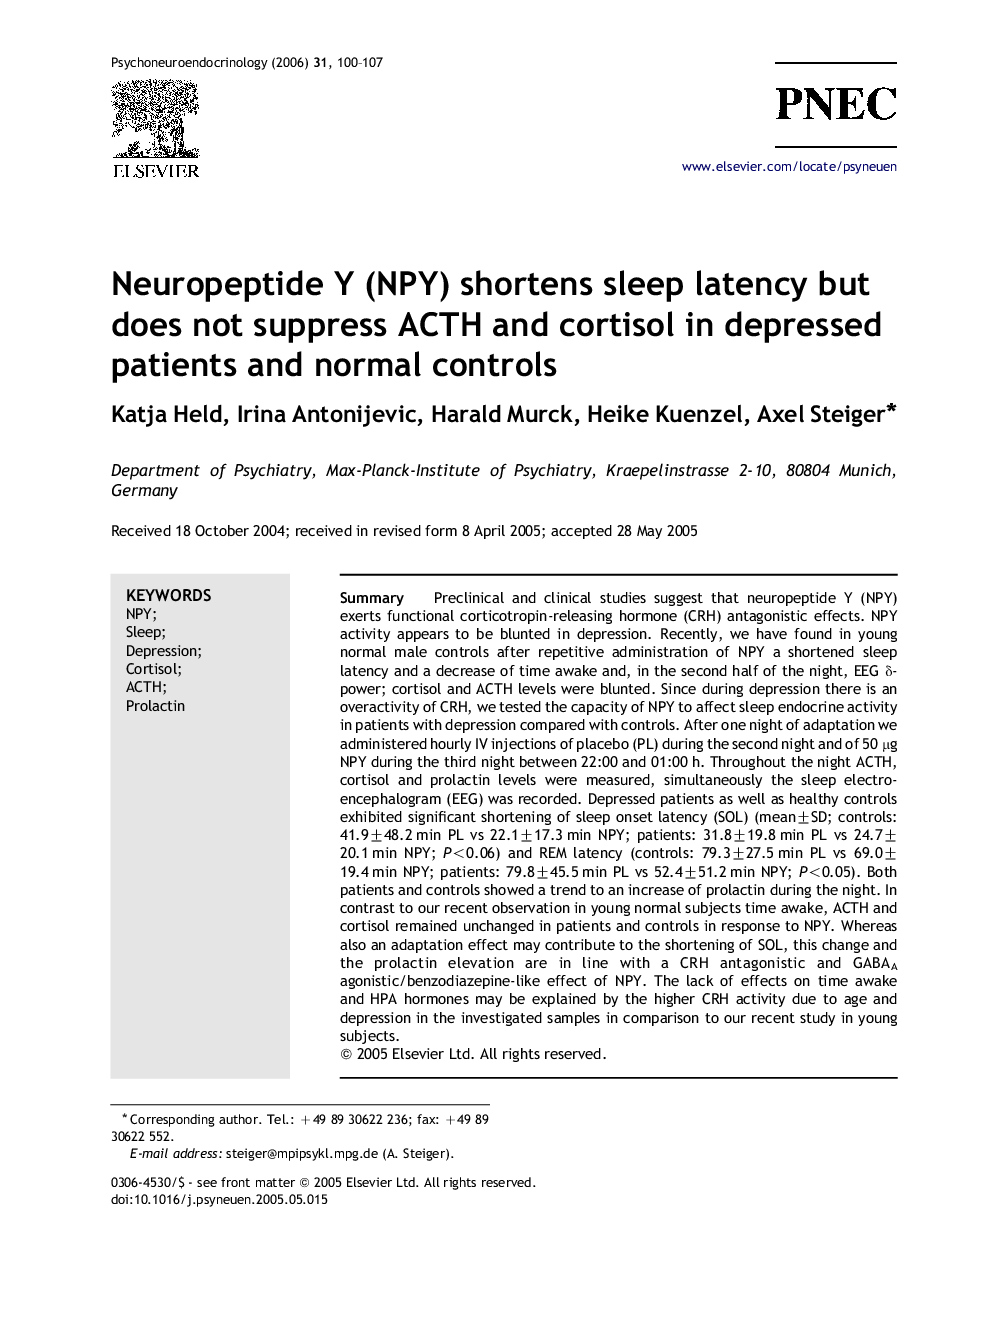 Neuropeptide Y (NPY) shortens sleep latency but does not suppress ACTH and cortisol in depressed patients and normal controls